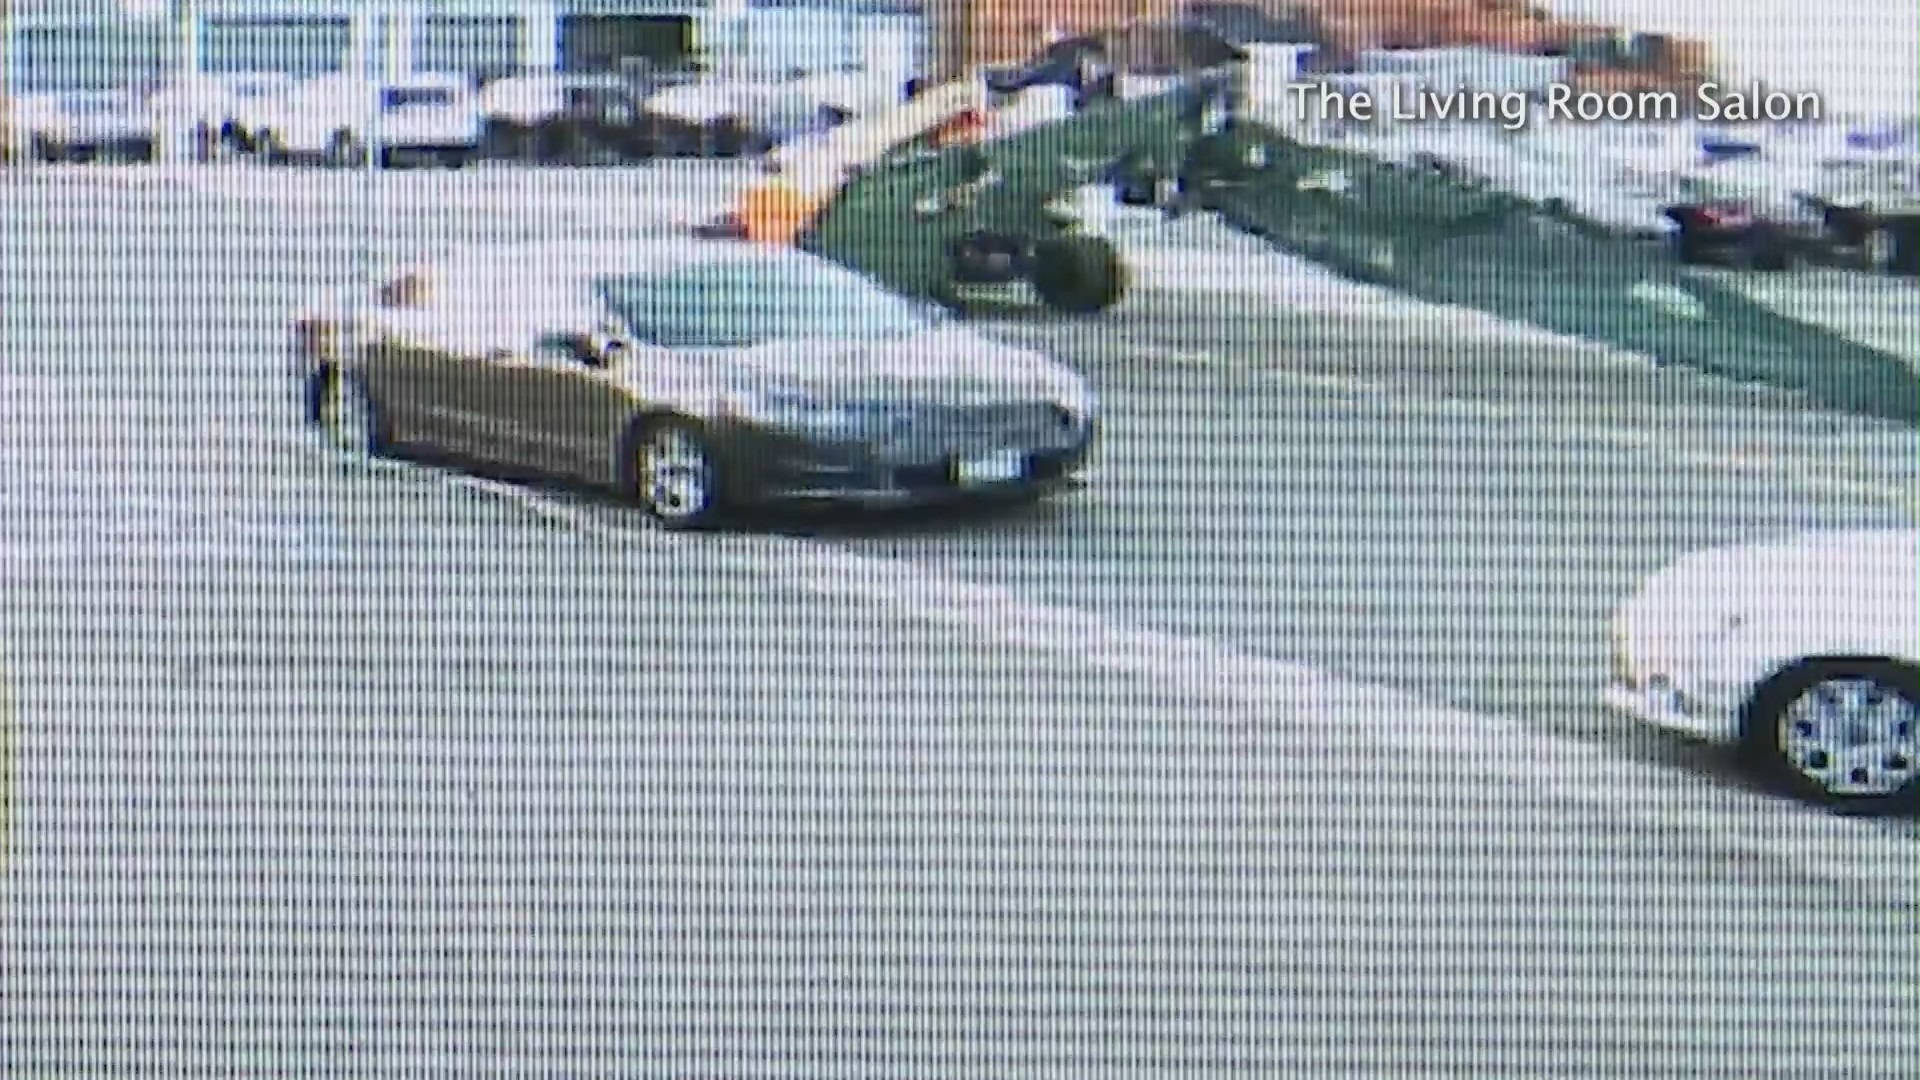 Security video captures a man with a stolen forklift going on a rampage in Costa Mesa on April 25, 2023. (The Living Room Salon)